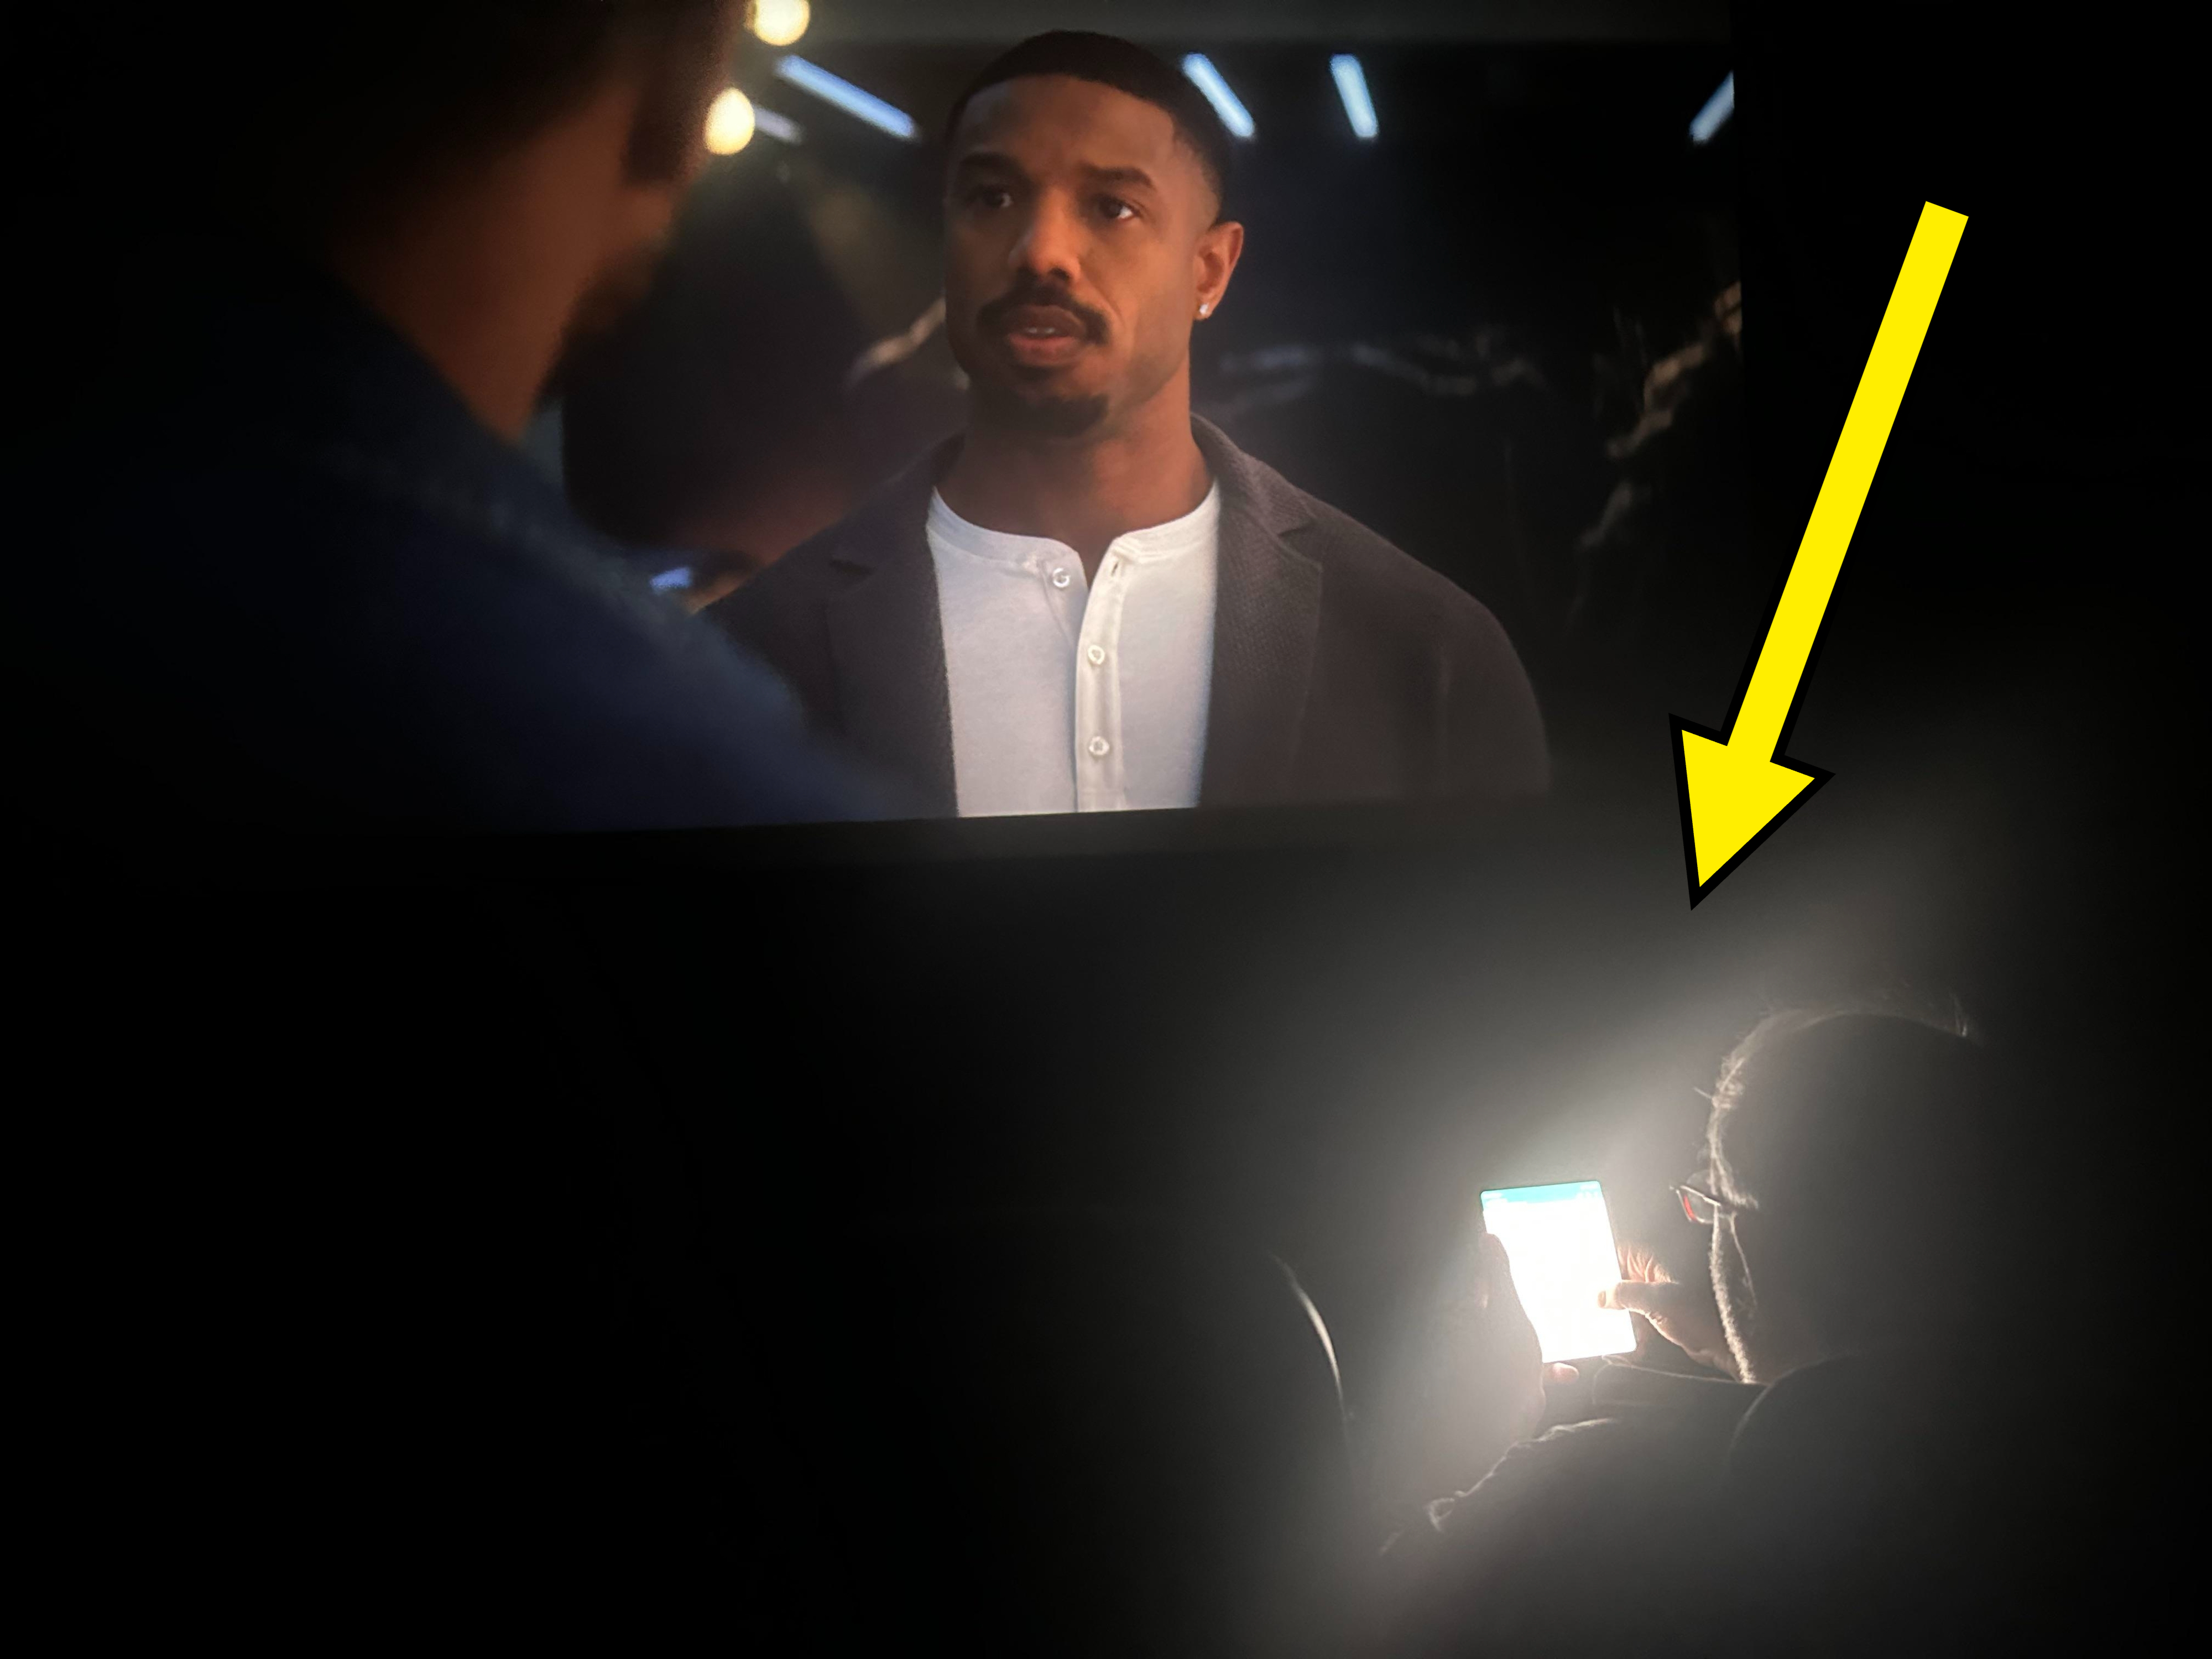 Person holding a phone with bright screen in a dark cinema, distracting from a movie scene with a man speaking